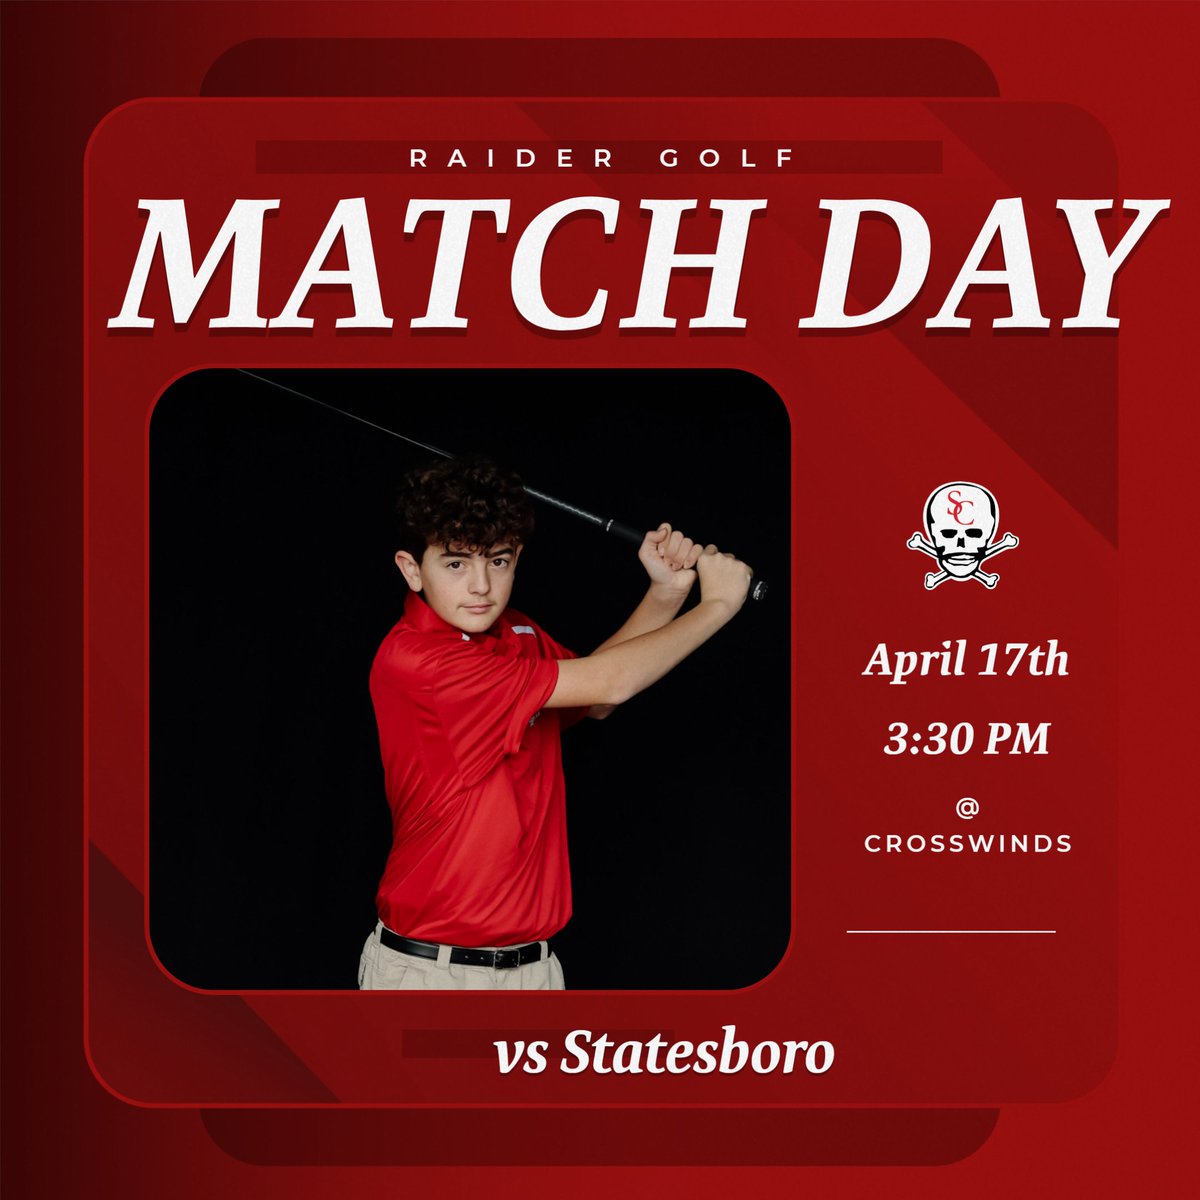 Good luck to the Raider Golf teams as they take on Statesboro today at Crosswinds!